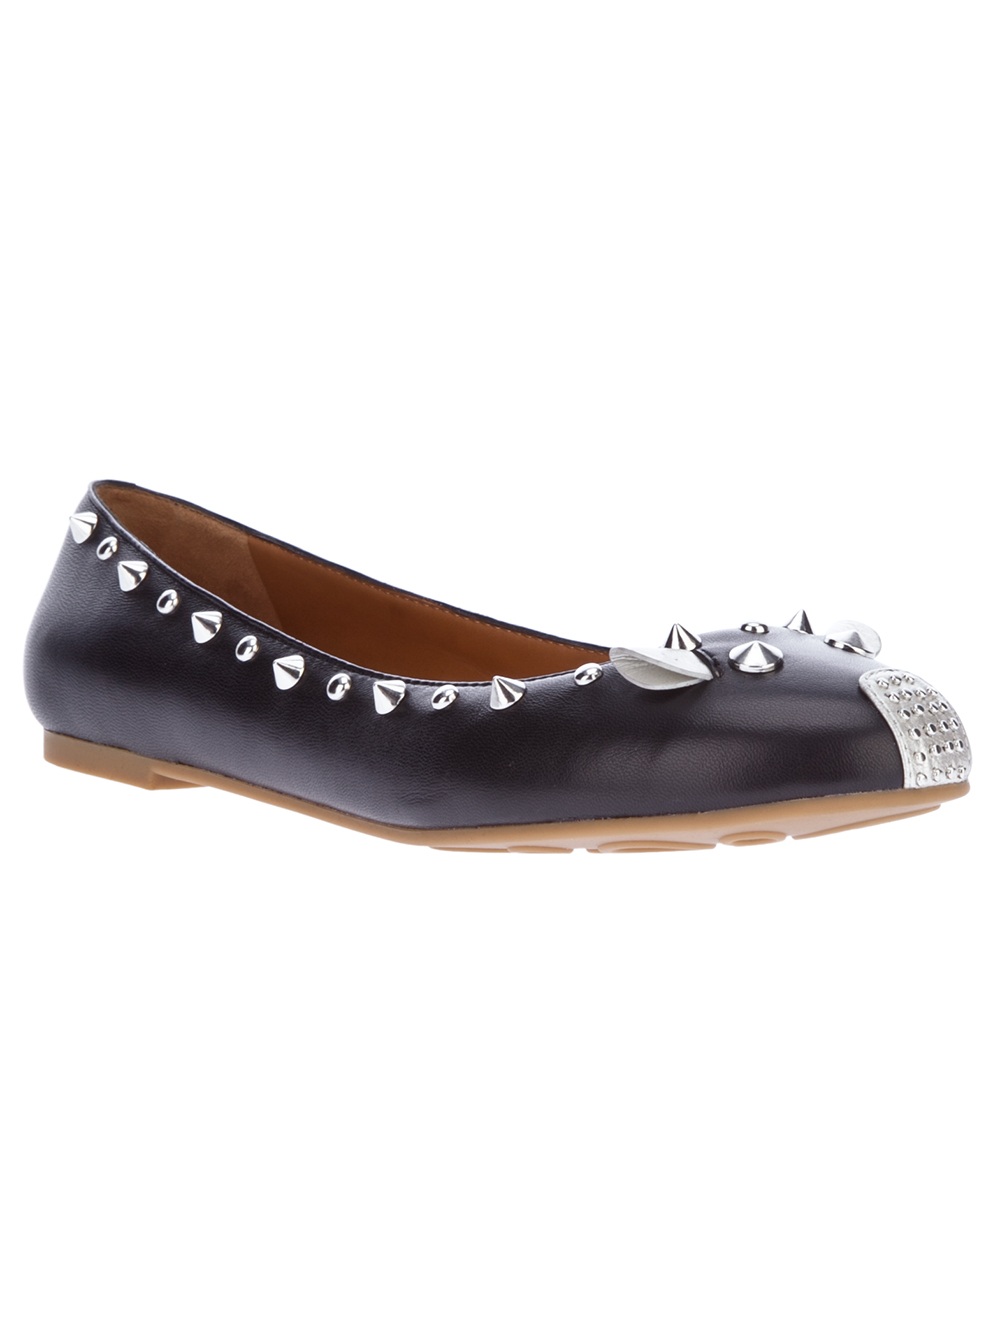 Lyst - Marc By Marc Jacobs Studded Mouse Ballerina Flat in Black